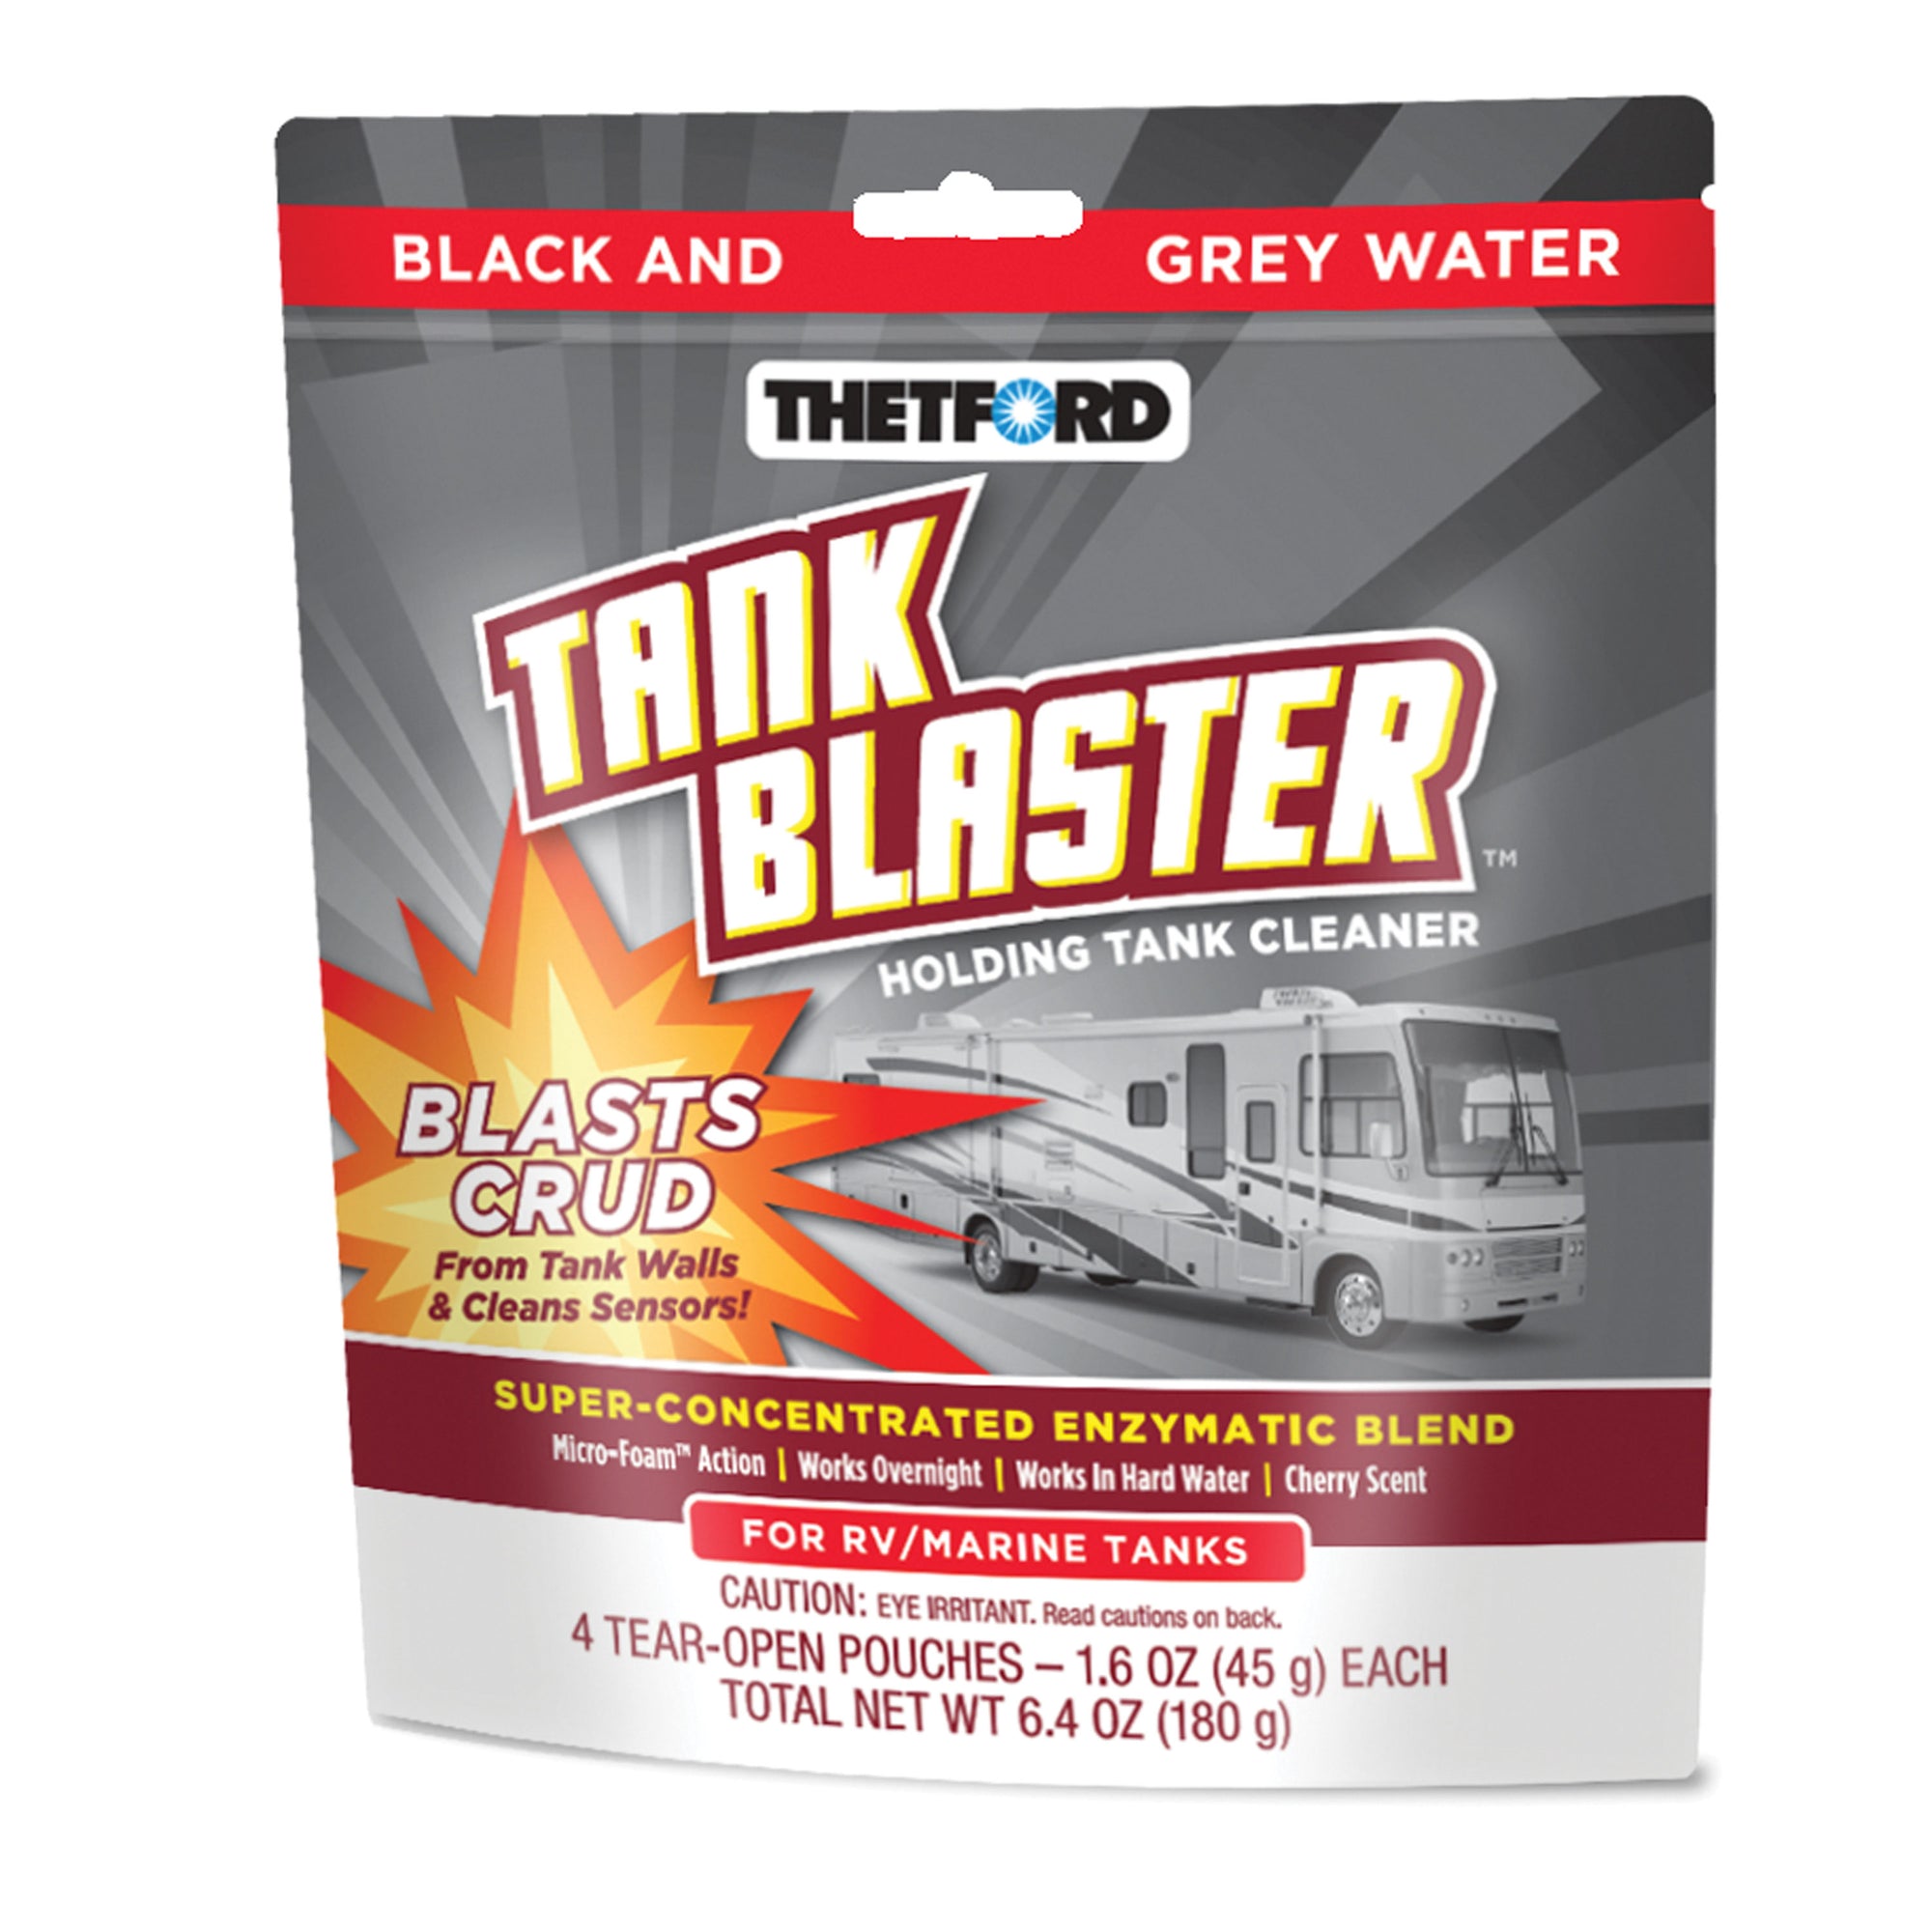 Thetford 96527 Tank Blaster Holding Tank Cleaner - 4-Pack 1.6 oz. Pouches